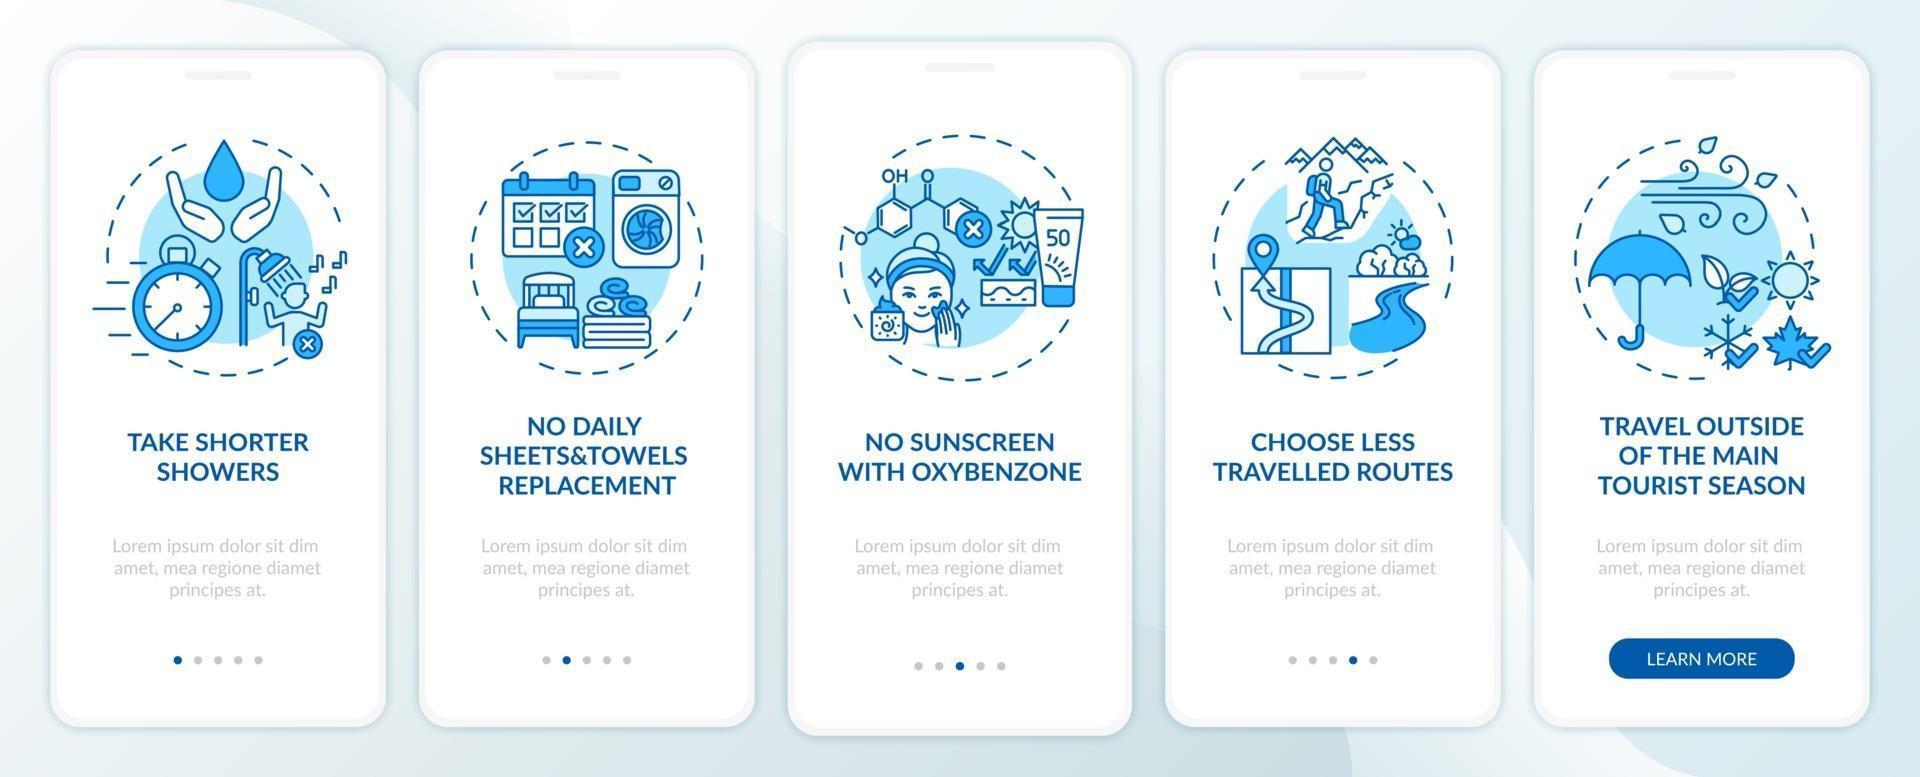 Sustainable tourism ideas onboarding mobile app page screen with concepts vector